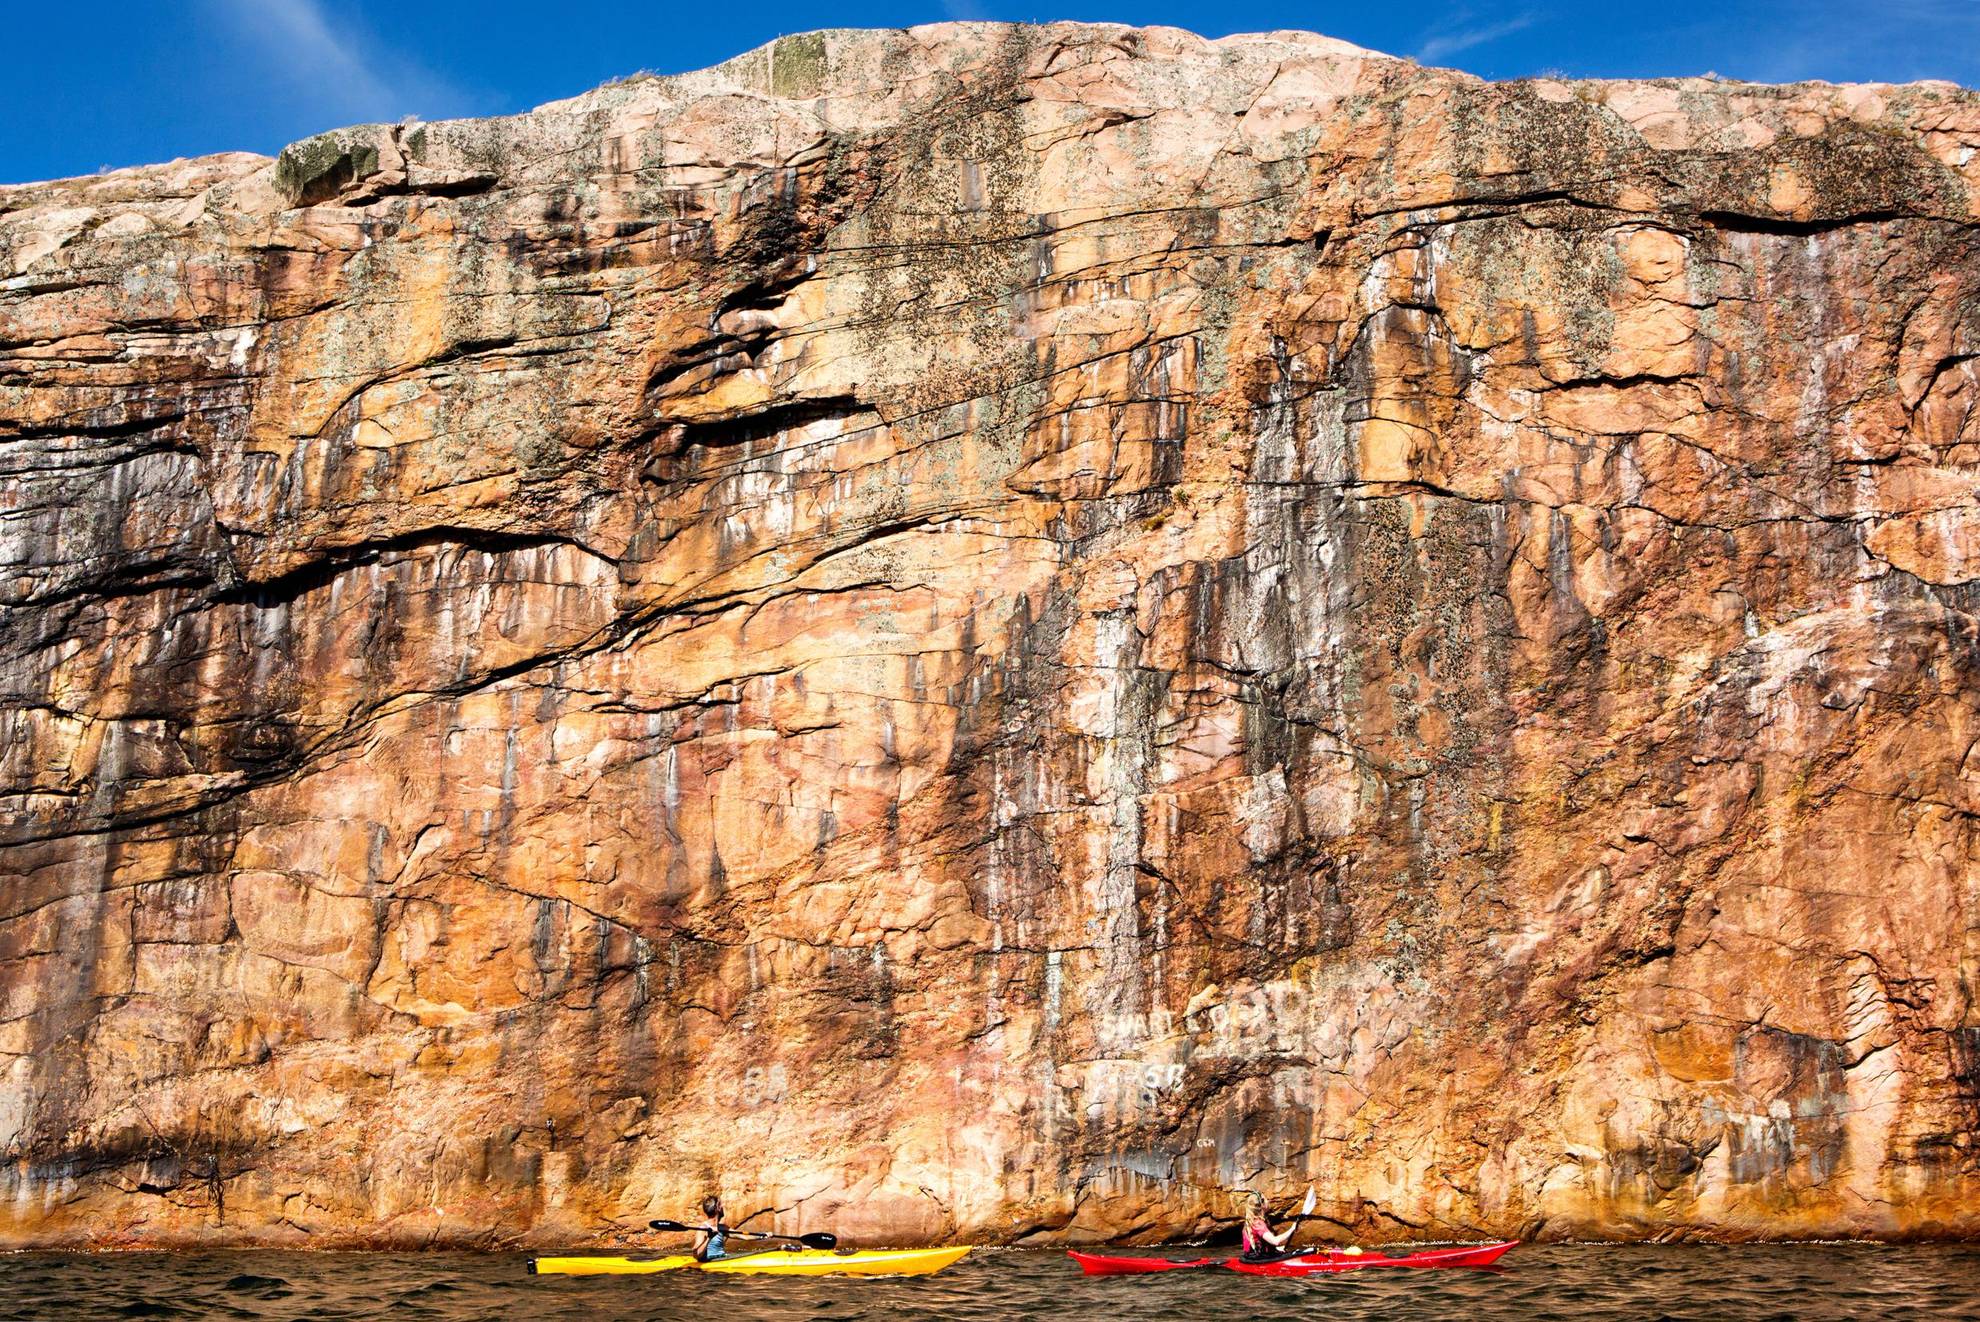 Two people kayaking by a steep cliff.